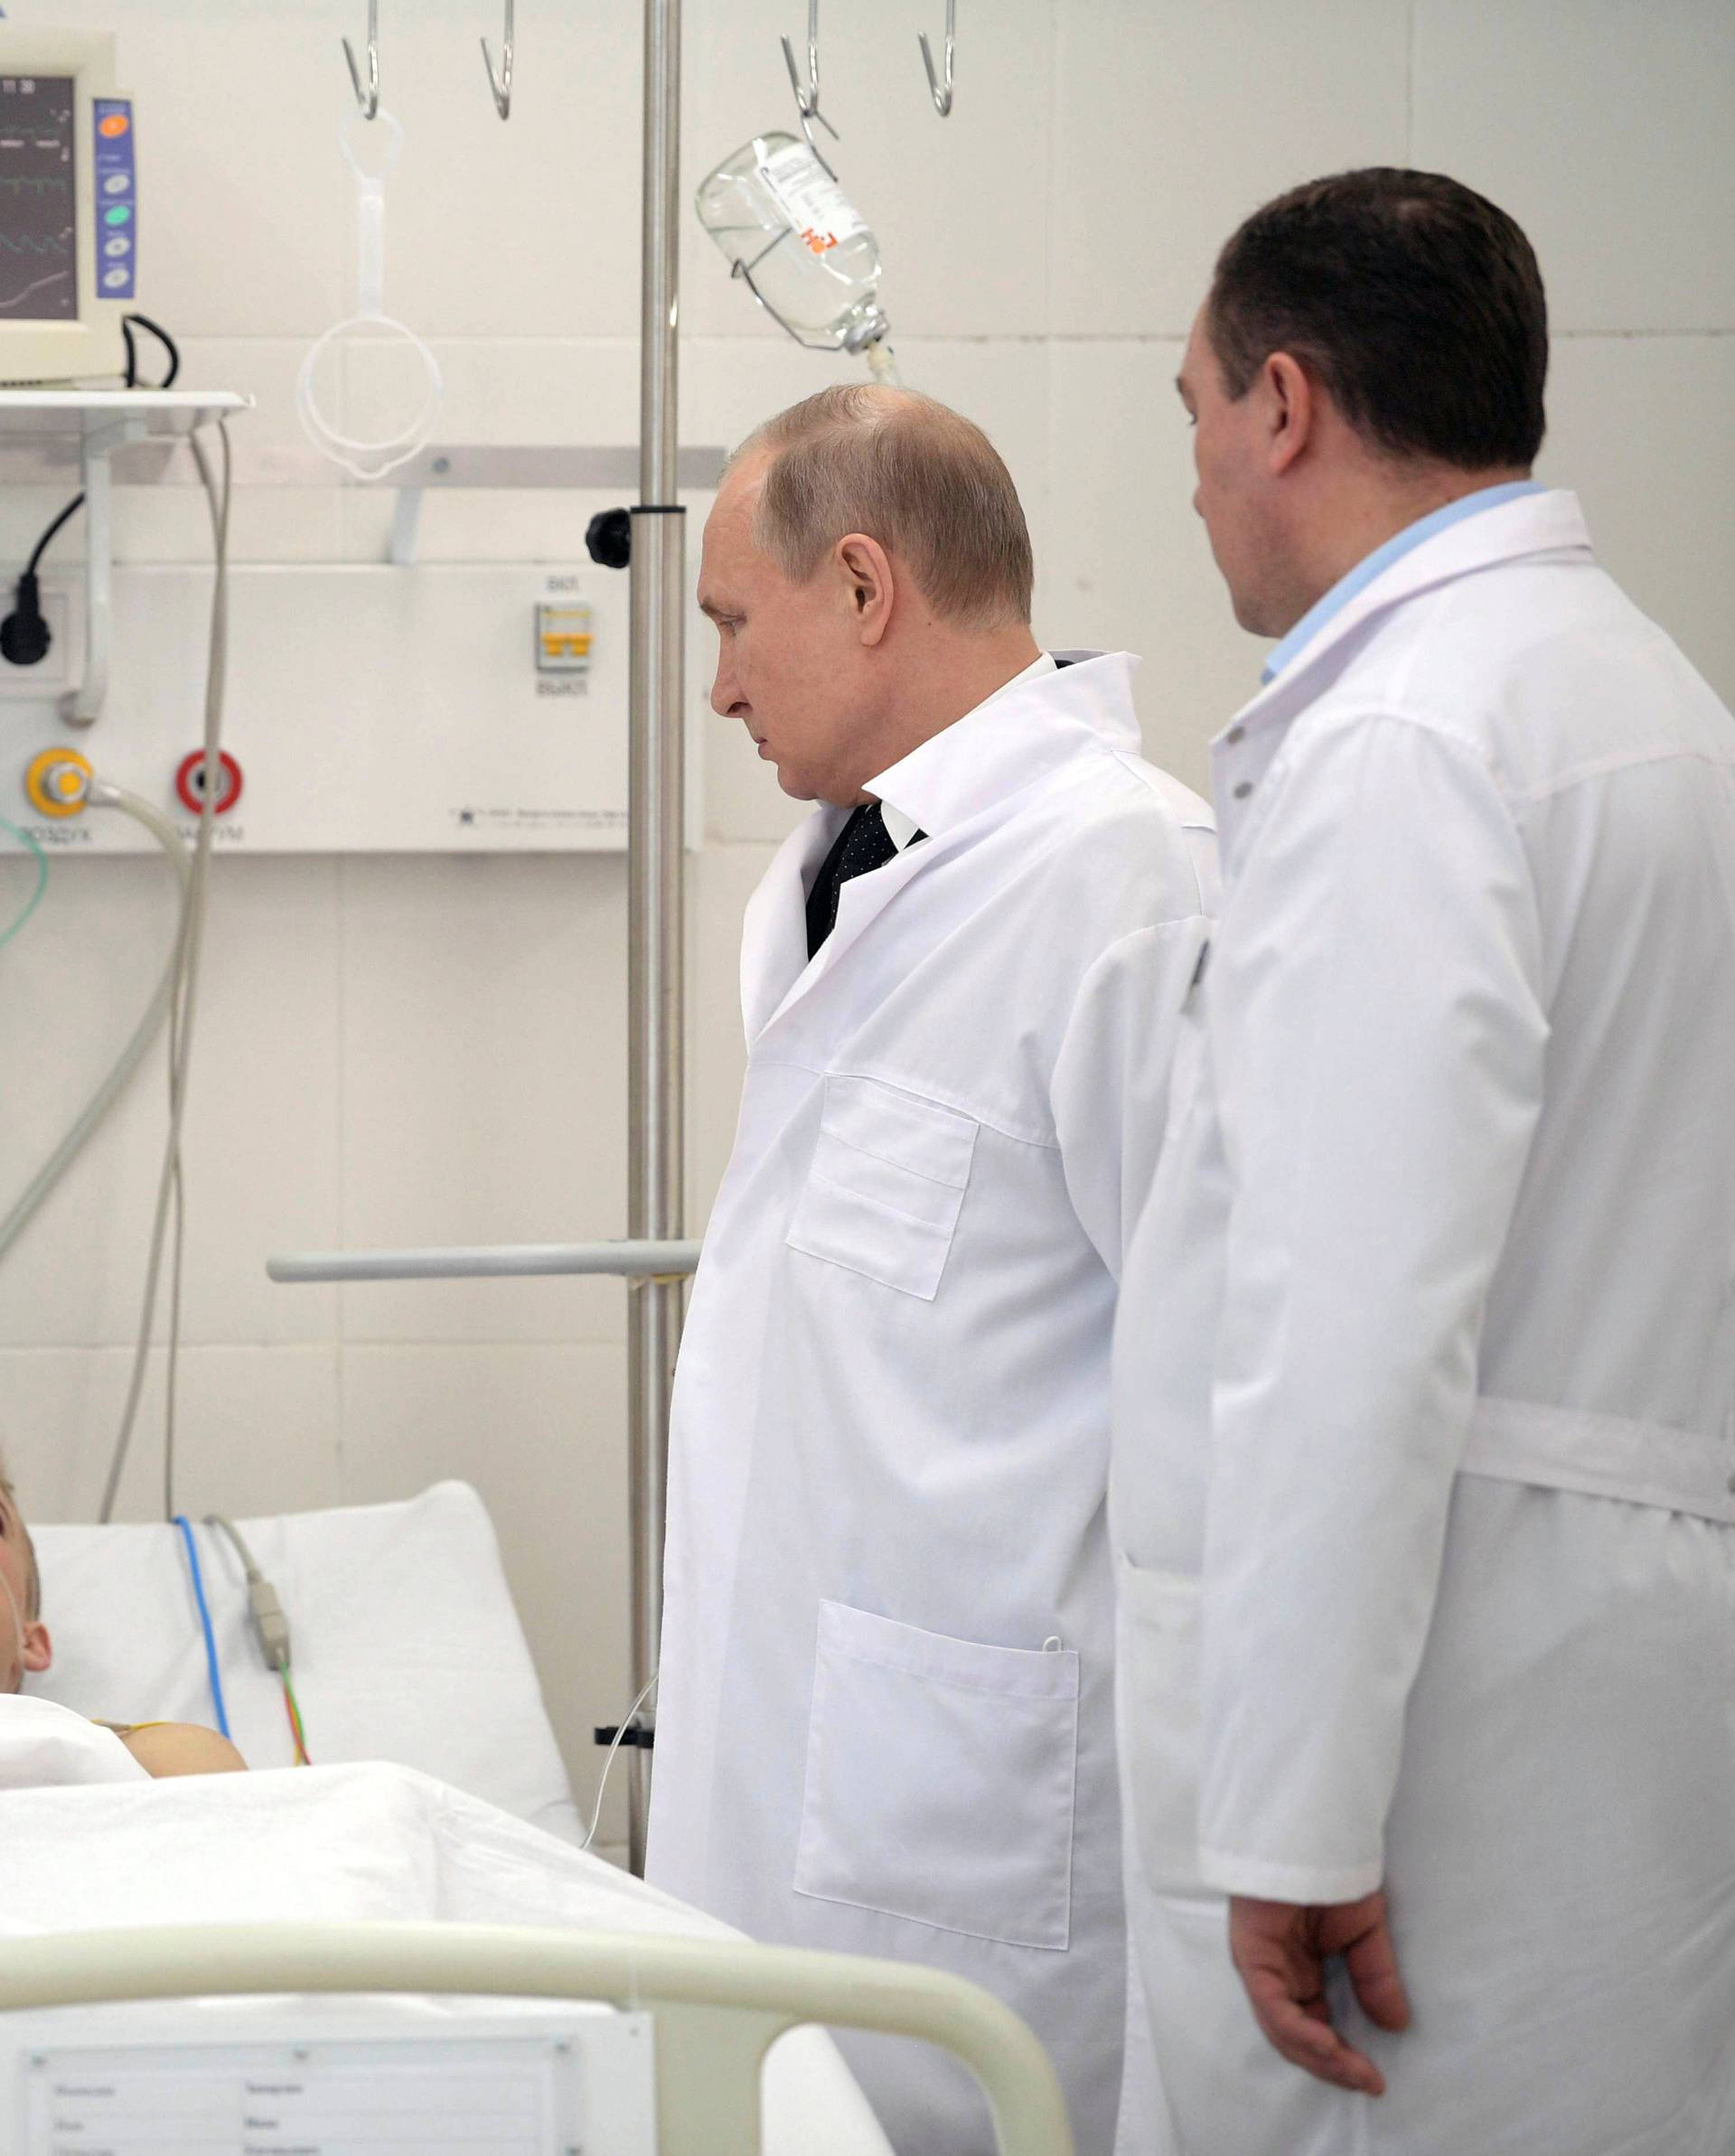 Russian President Vladimir Putin meets with victims injured during a fire in a shopping mall, at a hospital in Kemerovo